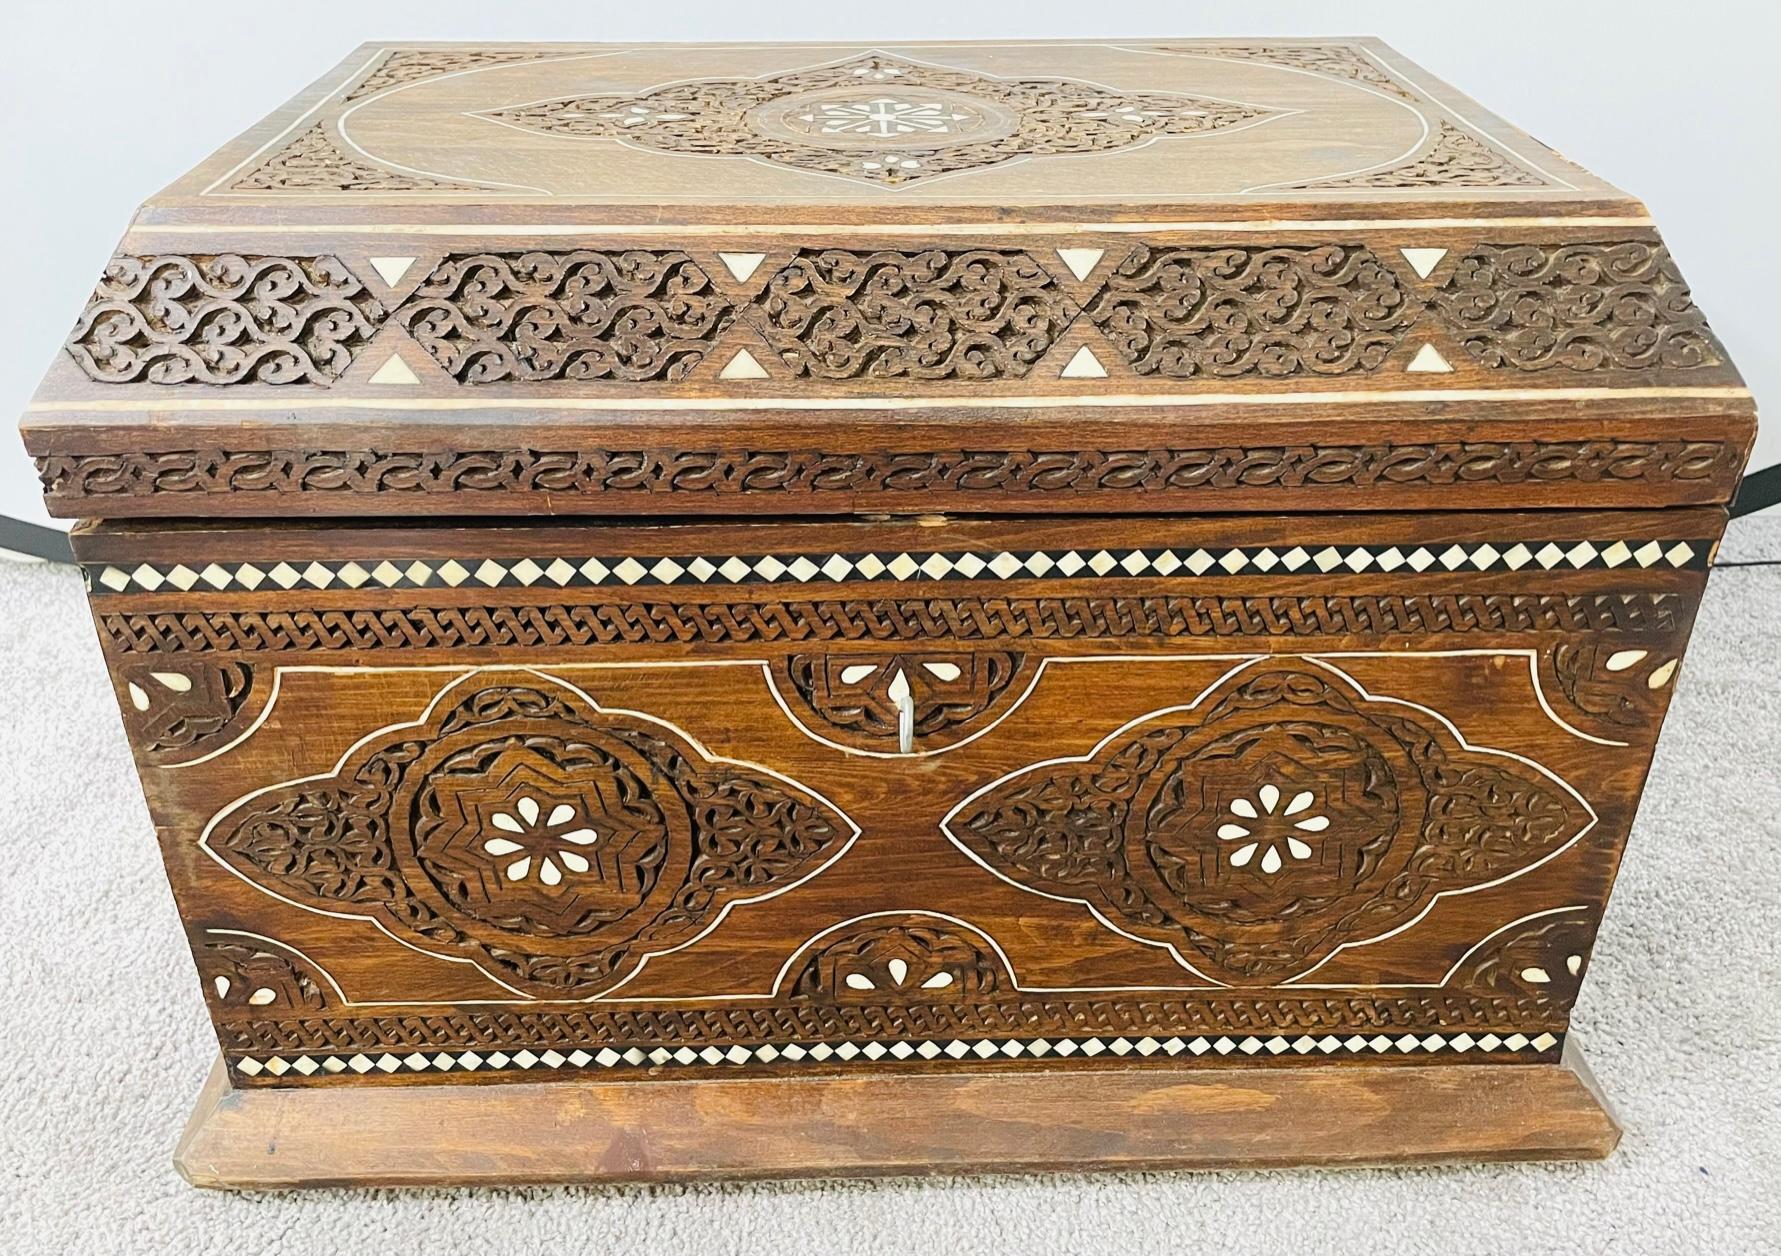 A 1950's beautiful one of a kind hand carved wooden Moroccan dowry chest. The chest features intricate moorish details and natural bone inlay. The interior is covered in fine genuine leather in a natural neutral color. Whether to store your valuable